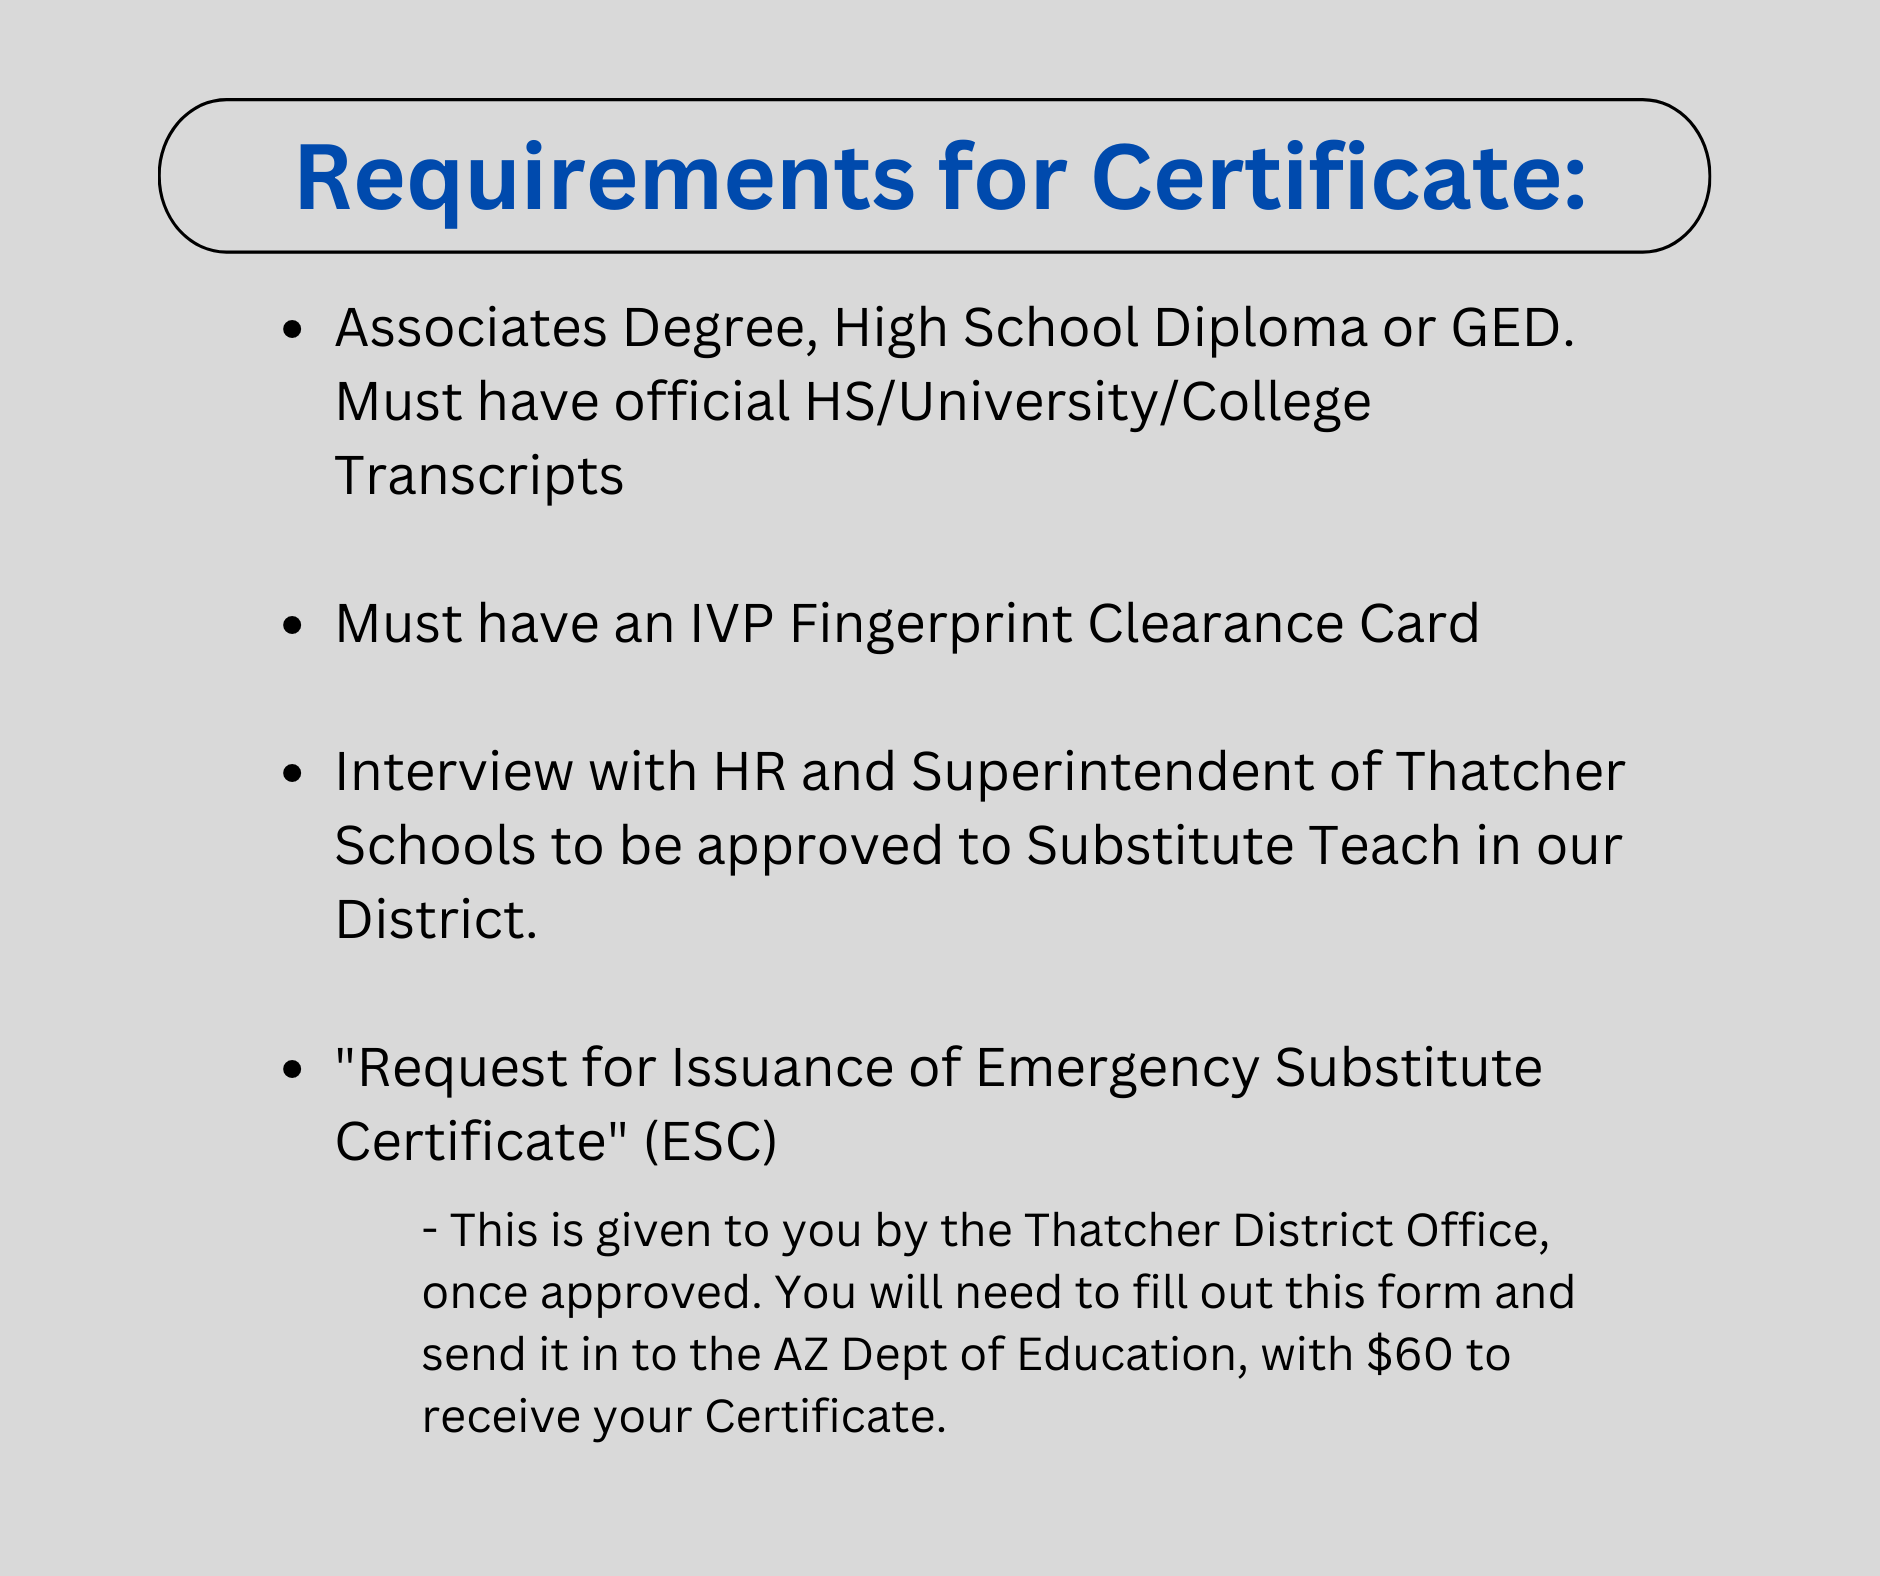 Substitute requirements